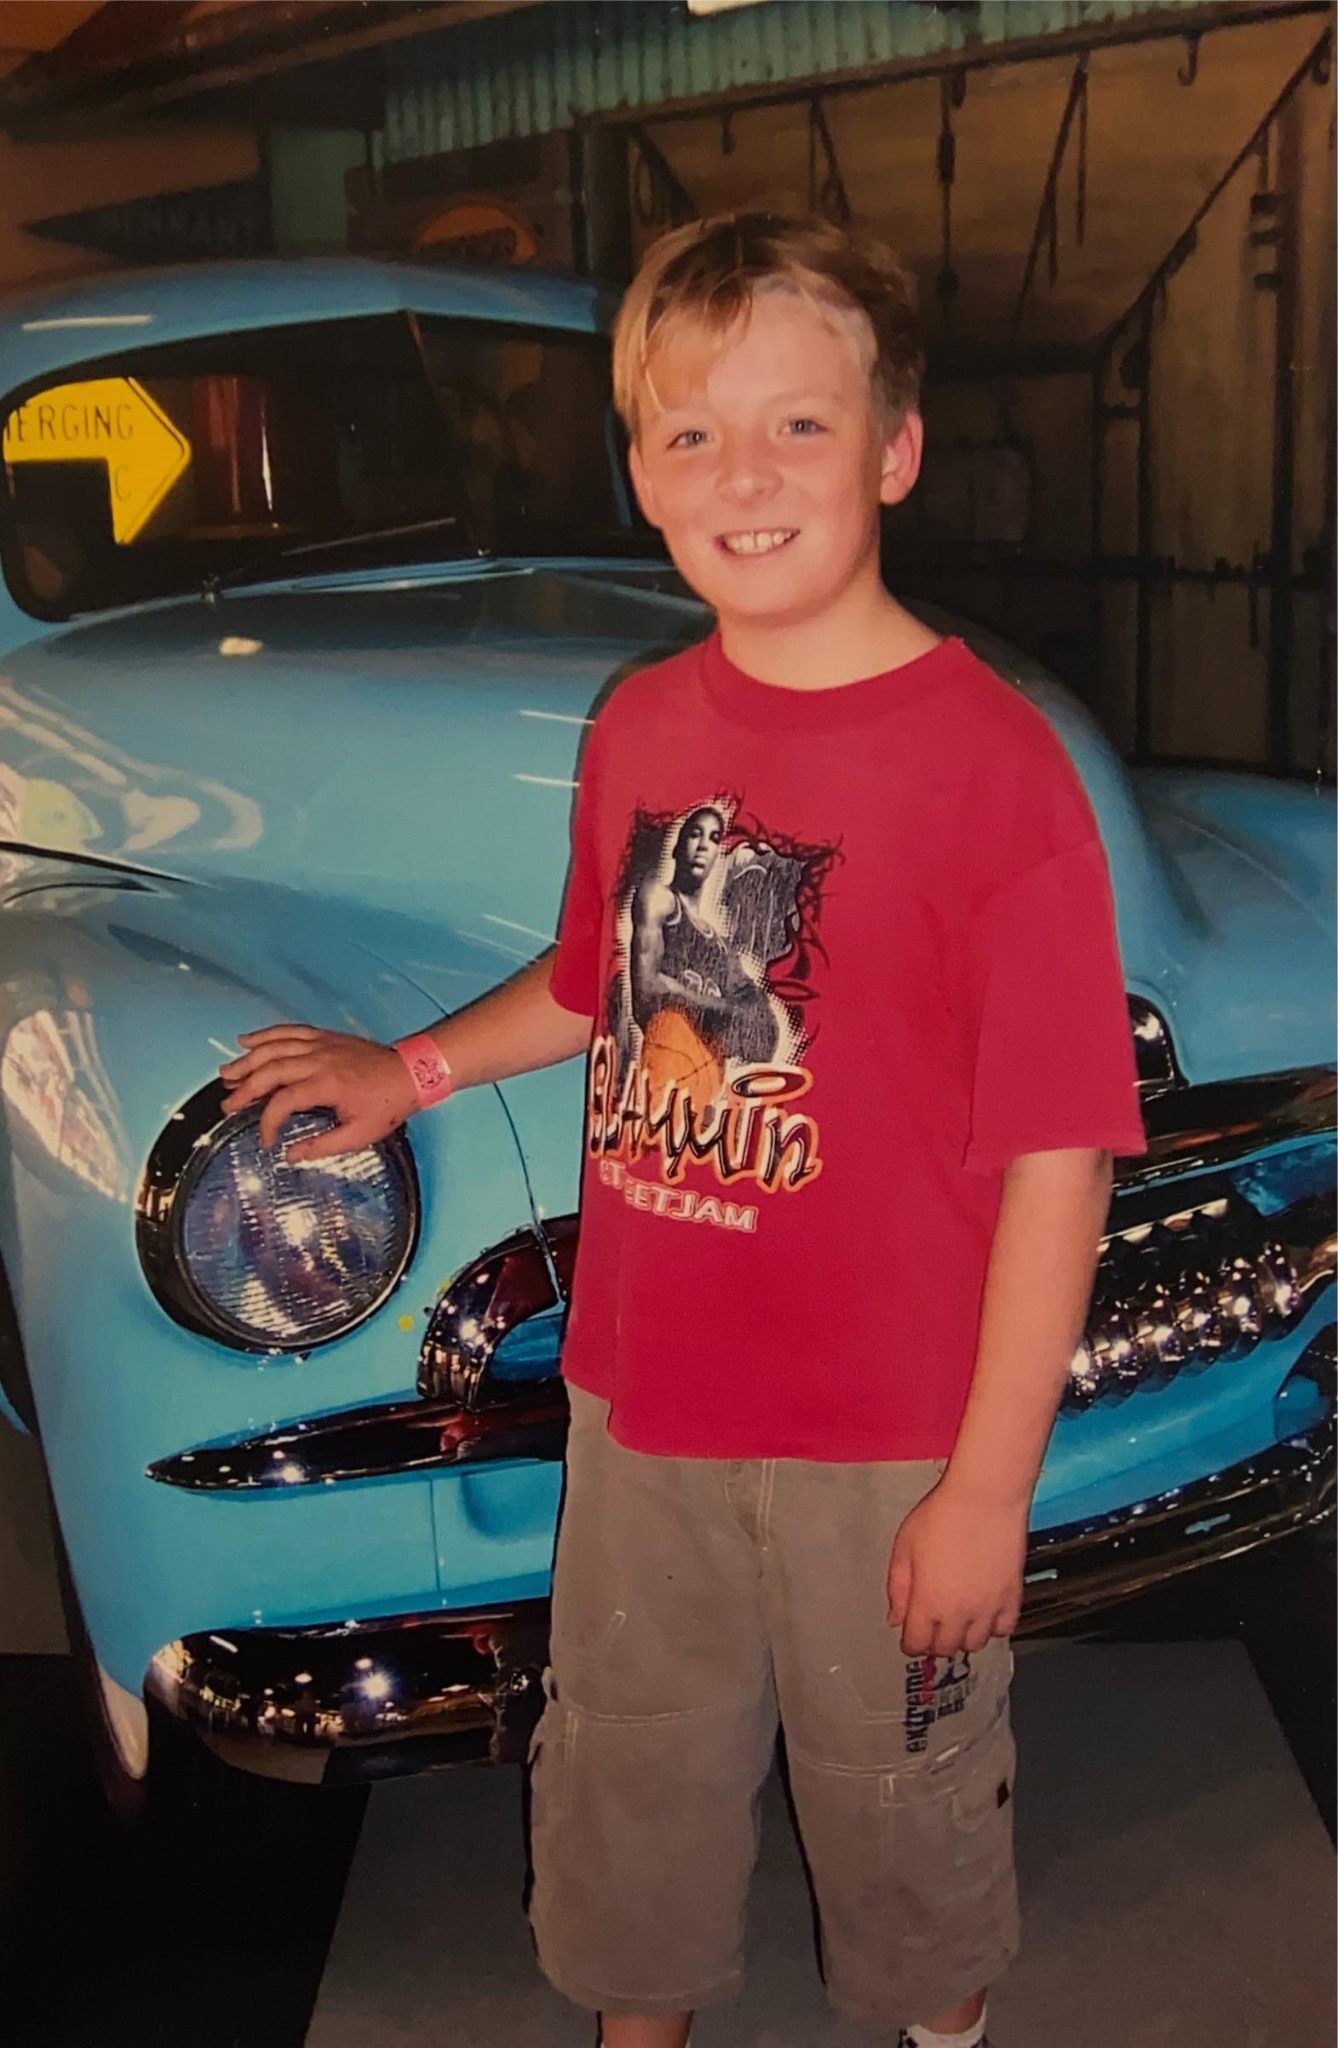 A boy in a red t-shirt stands next to a pale blue vintage car